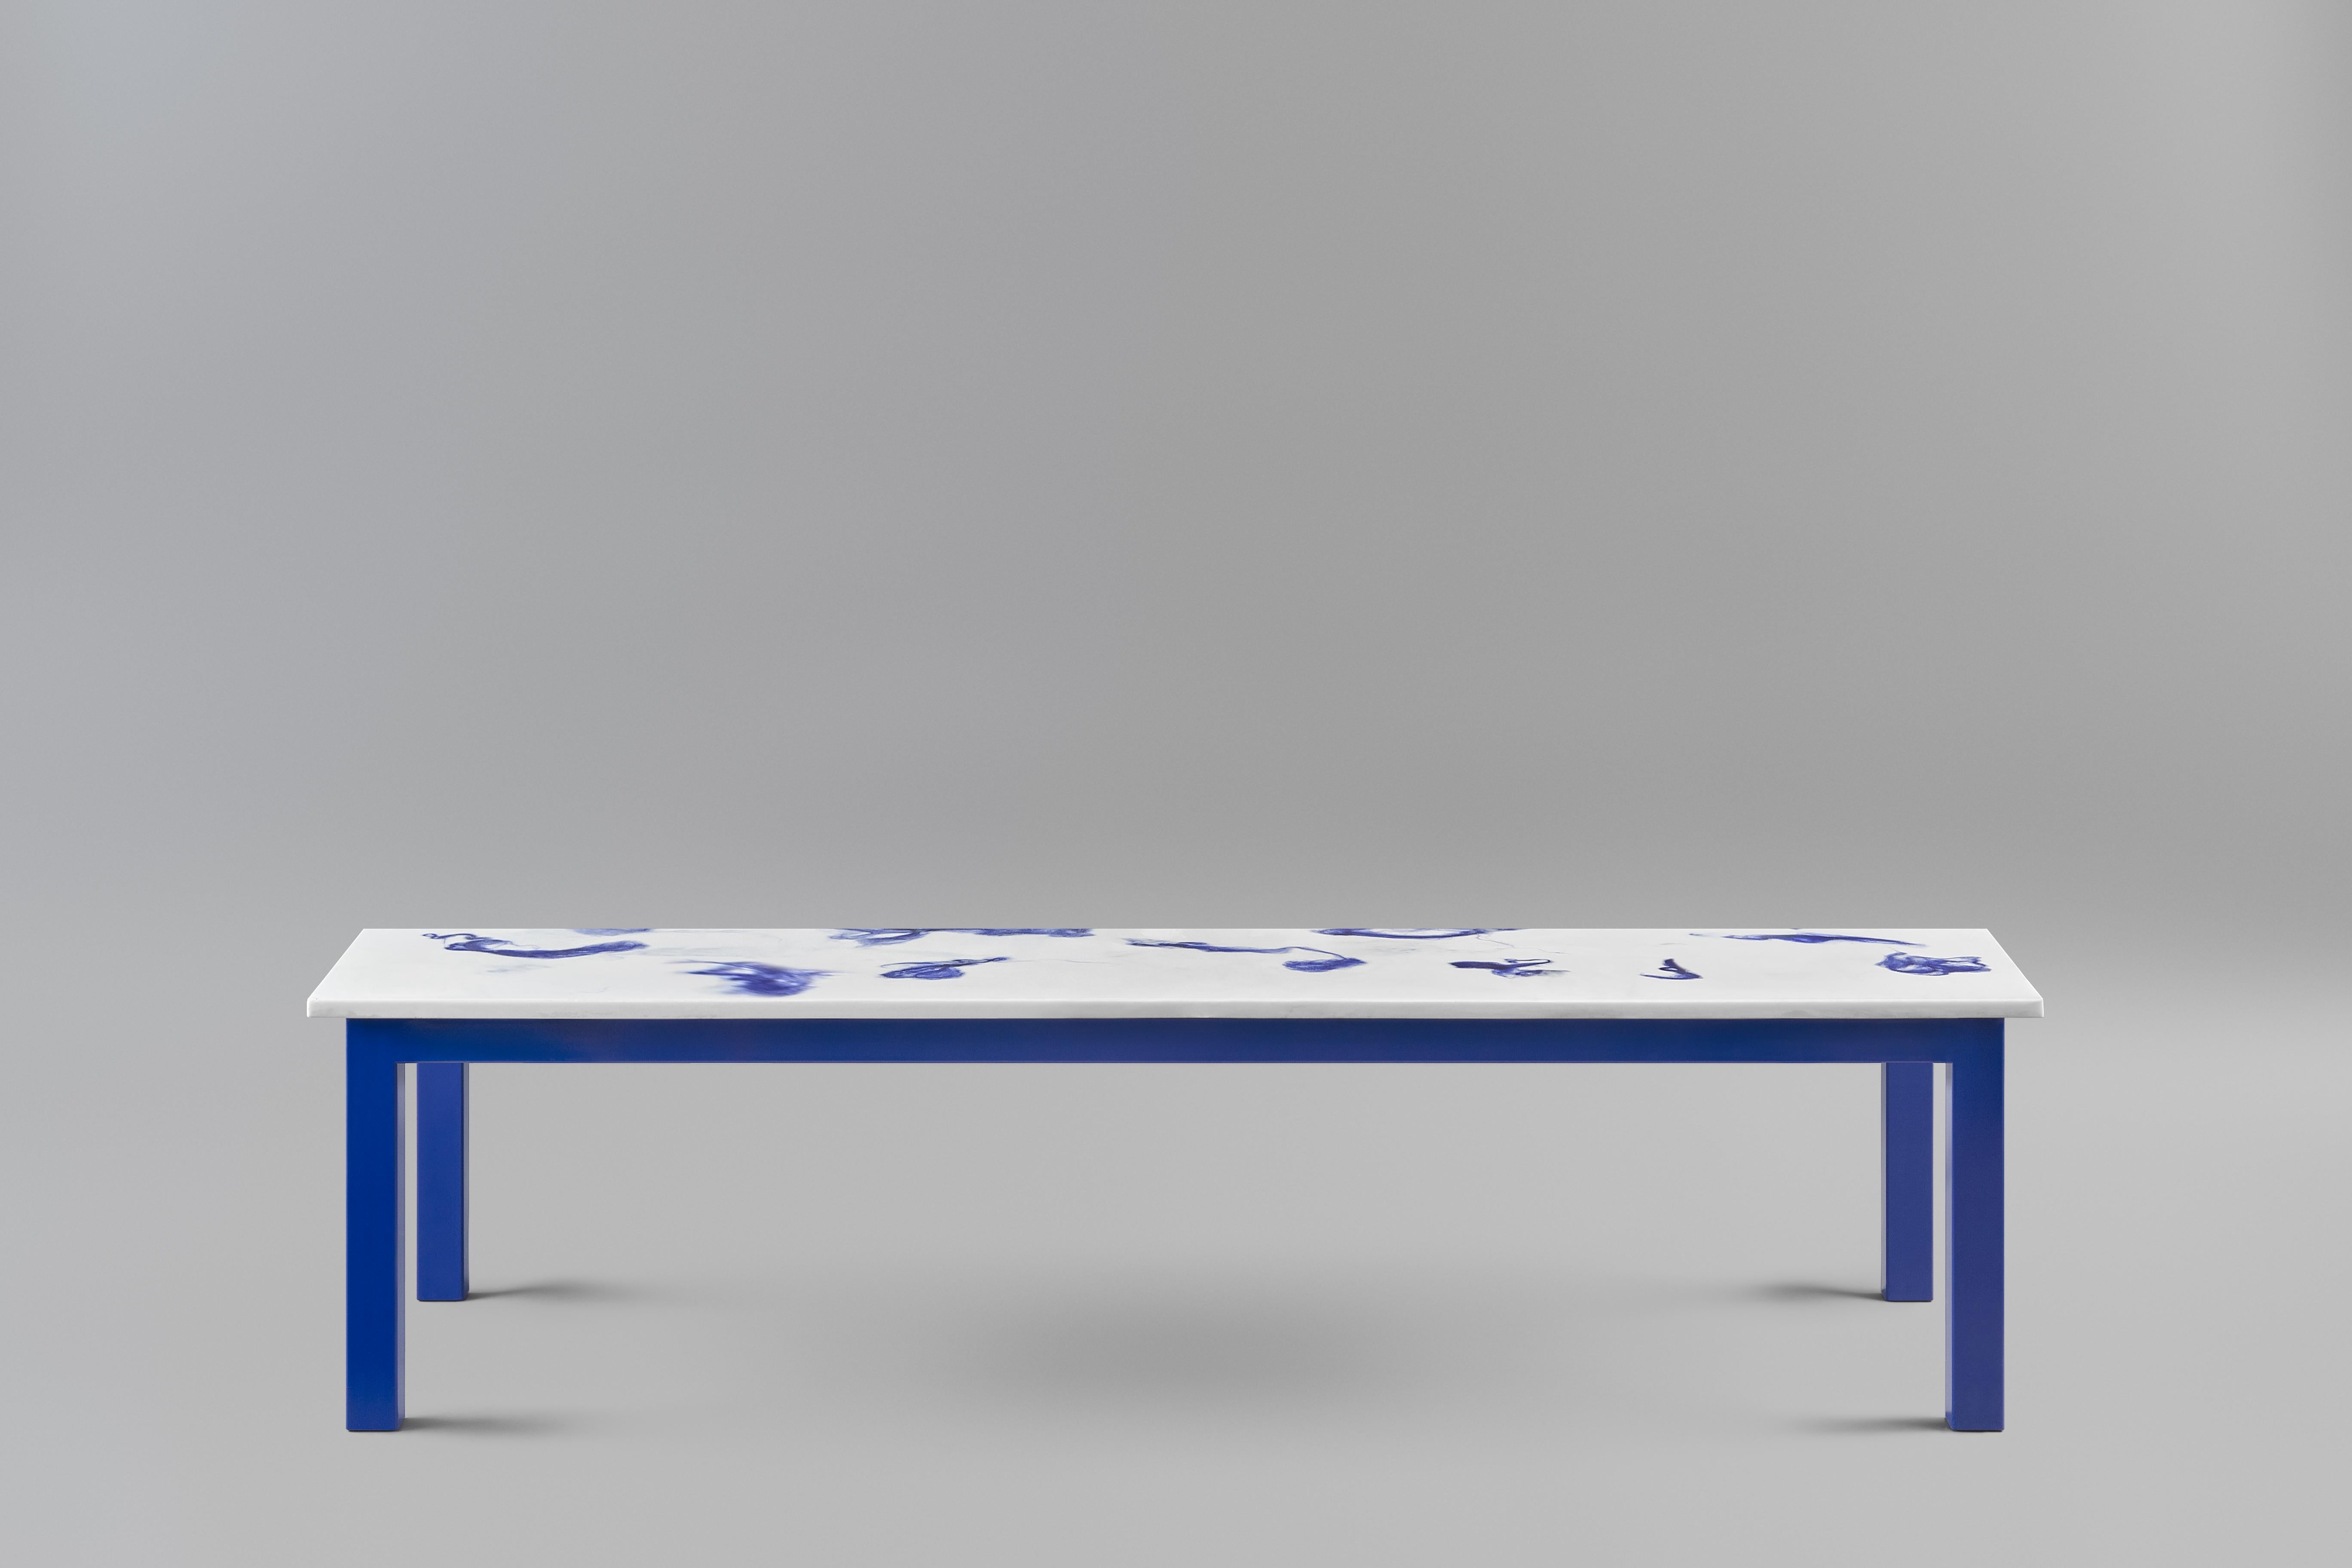 The fluent bench.
The tabletop is made in Marwoolus material with blue wool fibers and white Carrara marble powder base.
The steel frame structure is blue powder-coated.

Material info:
Marwoolus® is a new material invented by Marco Guazzini